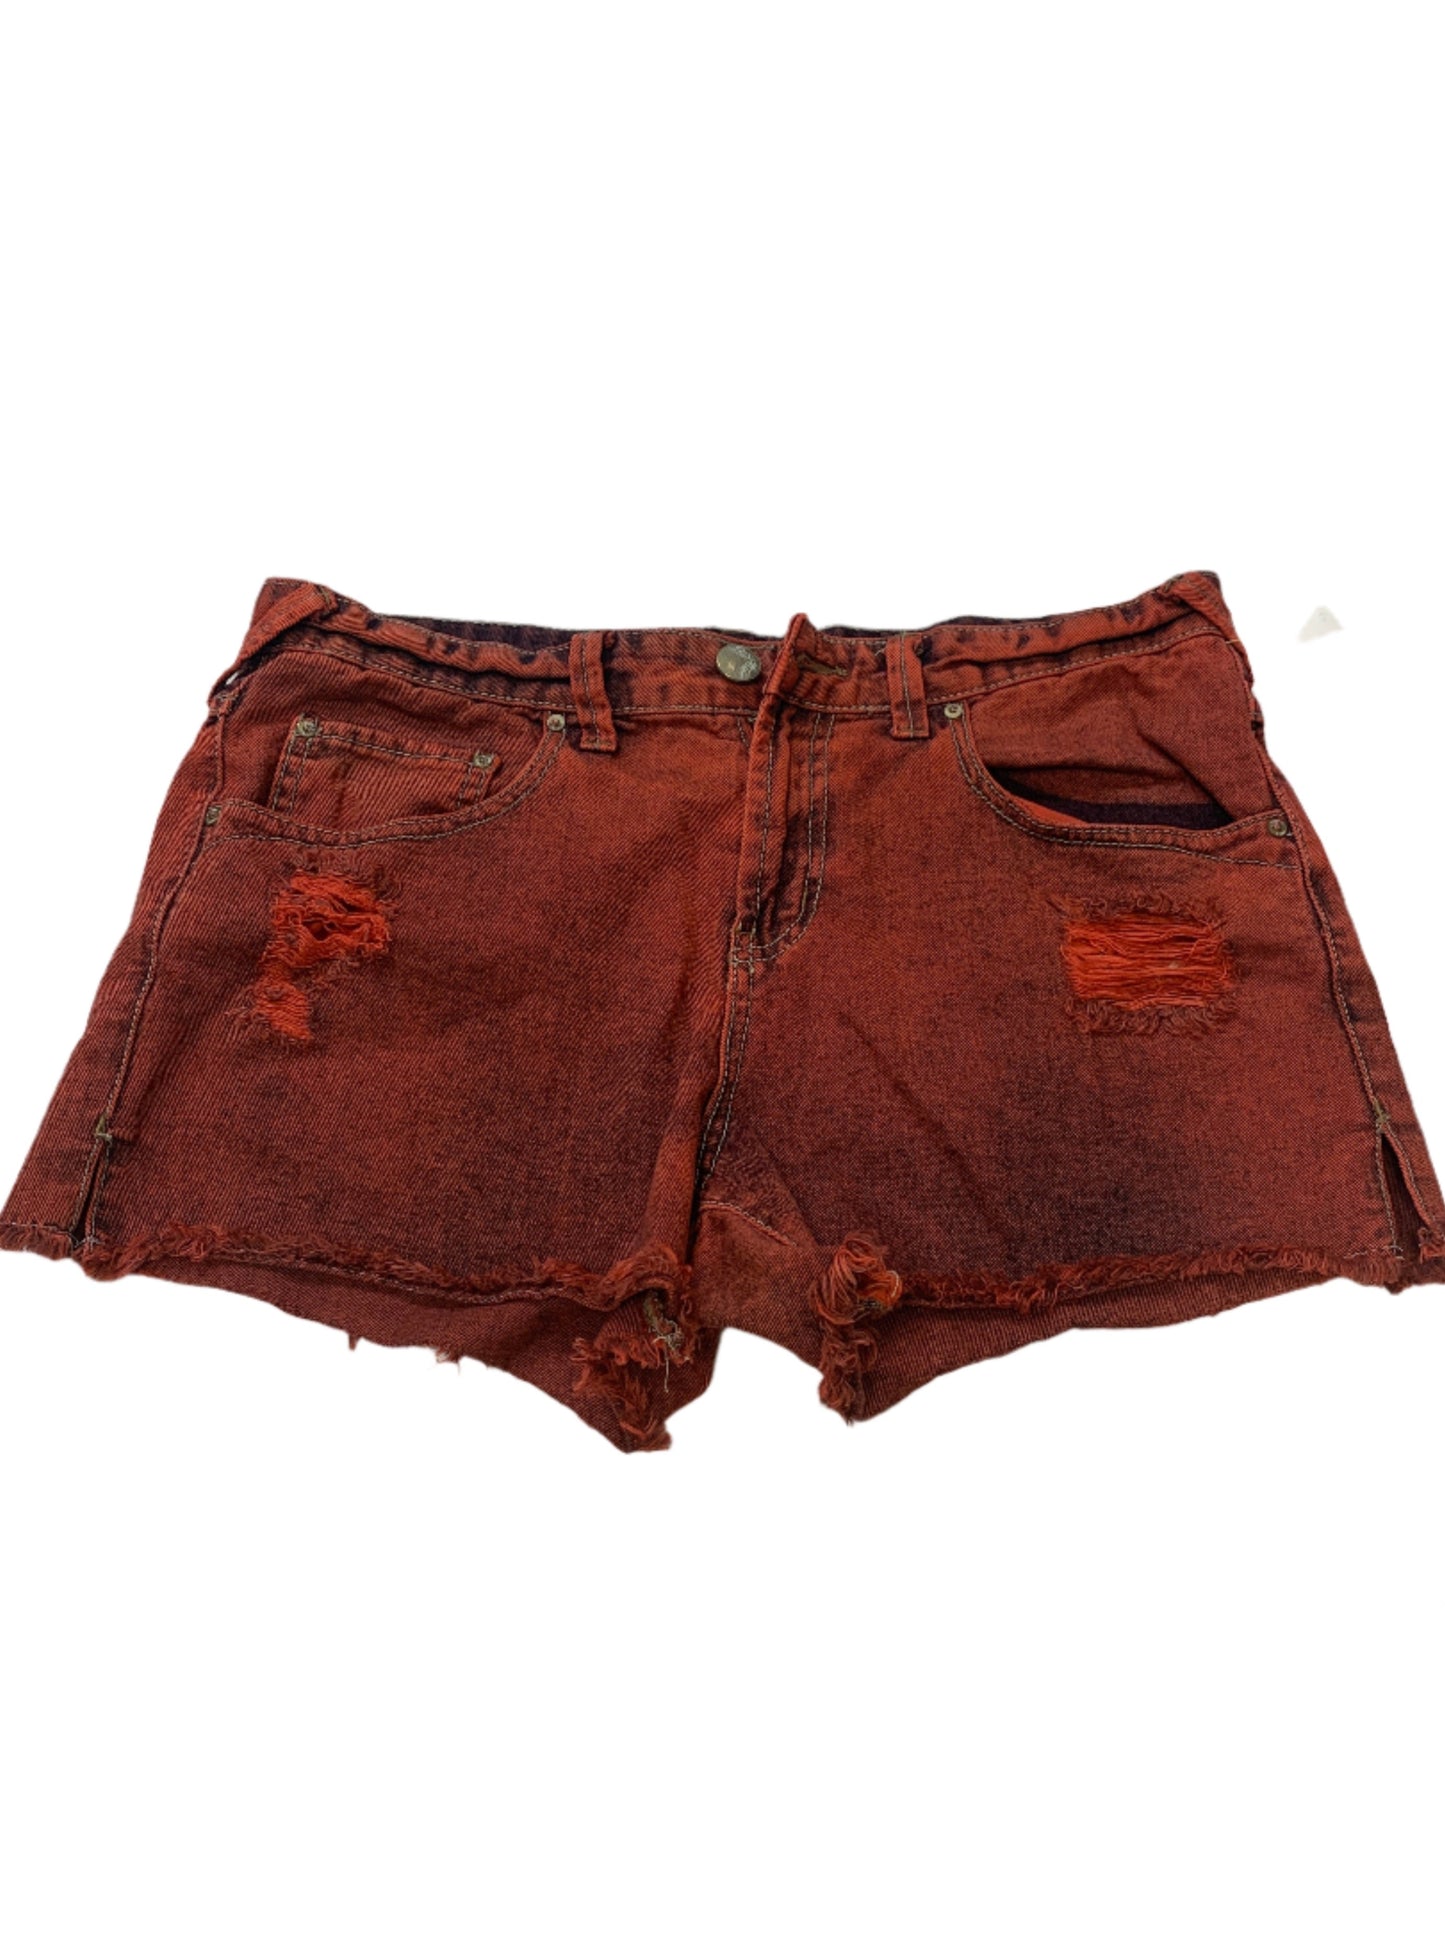 Red Shorts Free People, Size 8